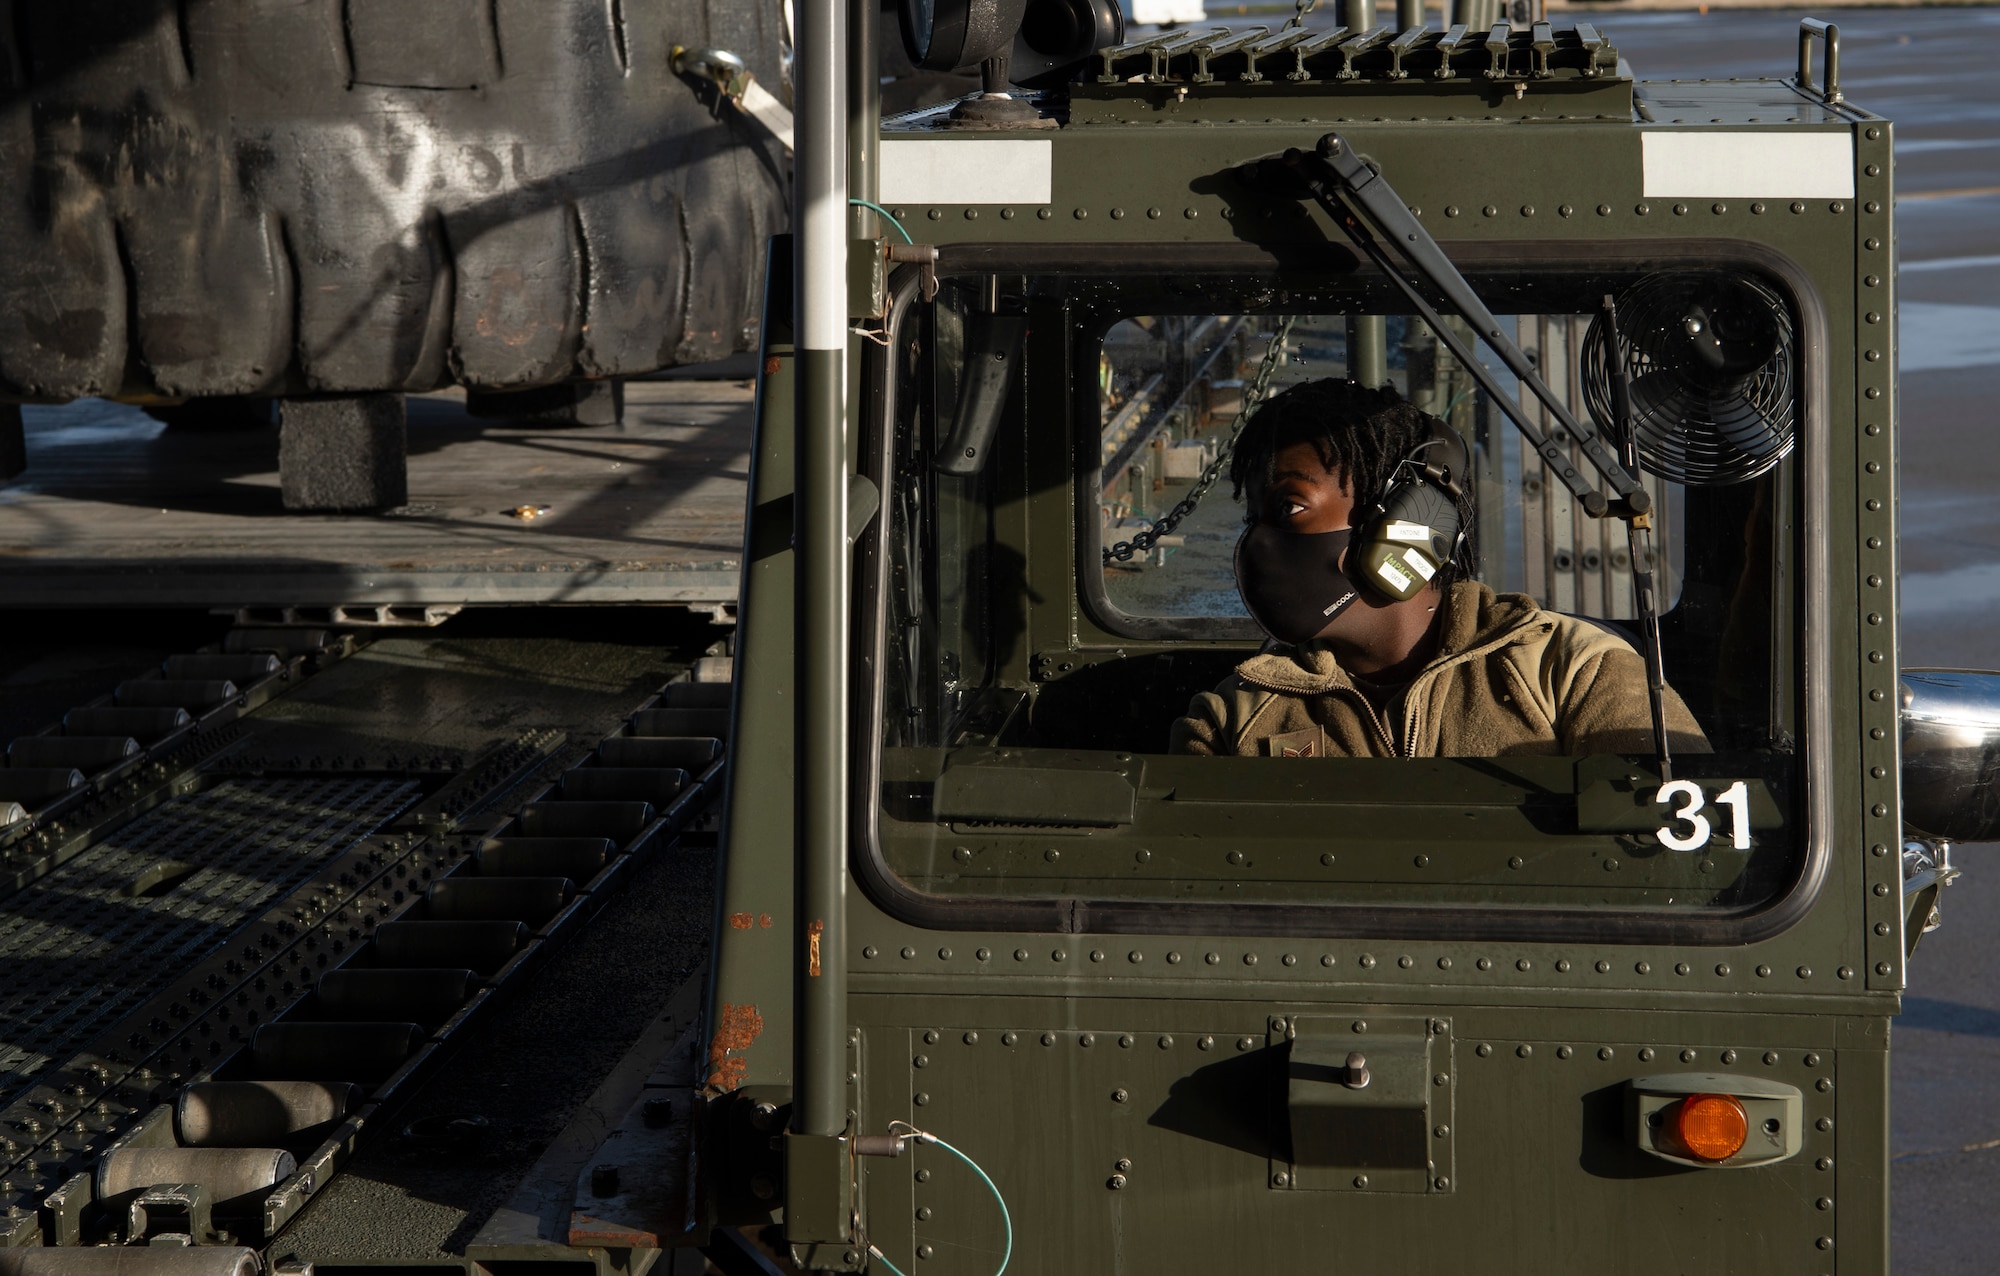 U.S. Air Force Senior Airman Briana Antoine, 62nd Aerial Port Squadron airfreight journeyman, drives a K-loader to the ramp of a C-17 Globemaster III at Joint Base Lewis-McChord, Washington, Dec. 14, 2020. Antoine and other Team McChord Airmen participated in an all-female training mission to honor women in the Air Force. (U.S. Air Force photo by Senior Airman Tryphena Mayhugh)